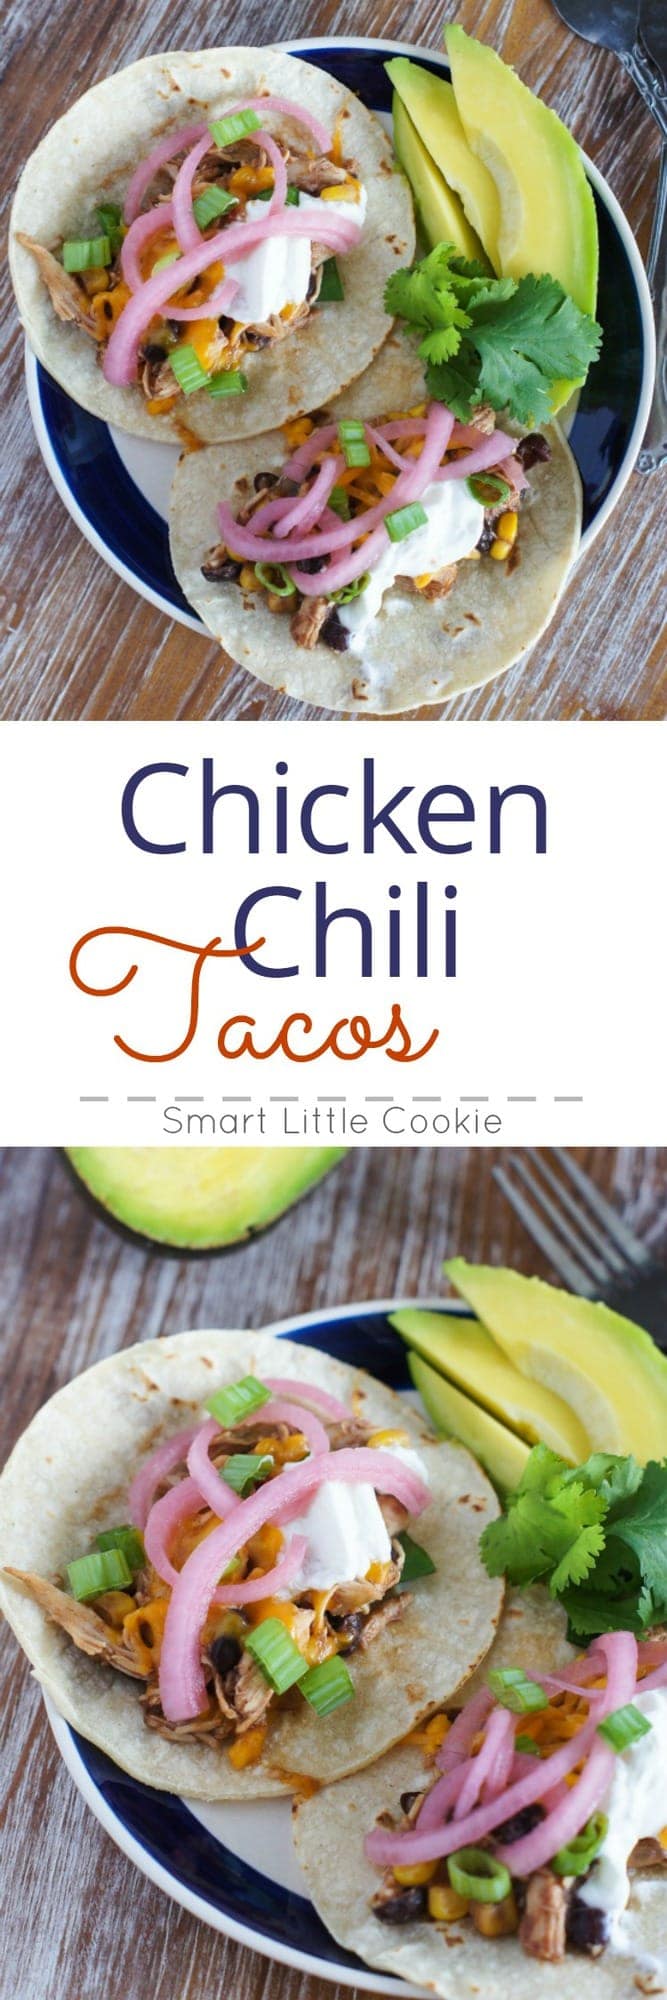 Chicken Chili Tacos ~ The easiest, quickest and most flavorful tacos made with the best leftover slow cooker chicken chili, corn tortillas, avocados, pickled onions and sour cream.